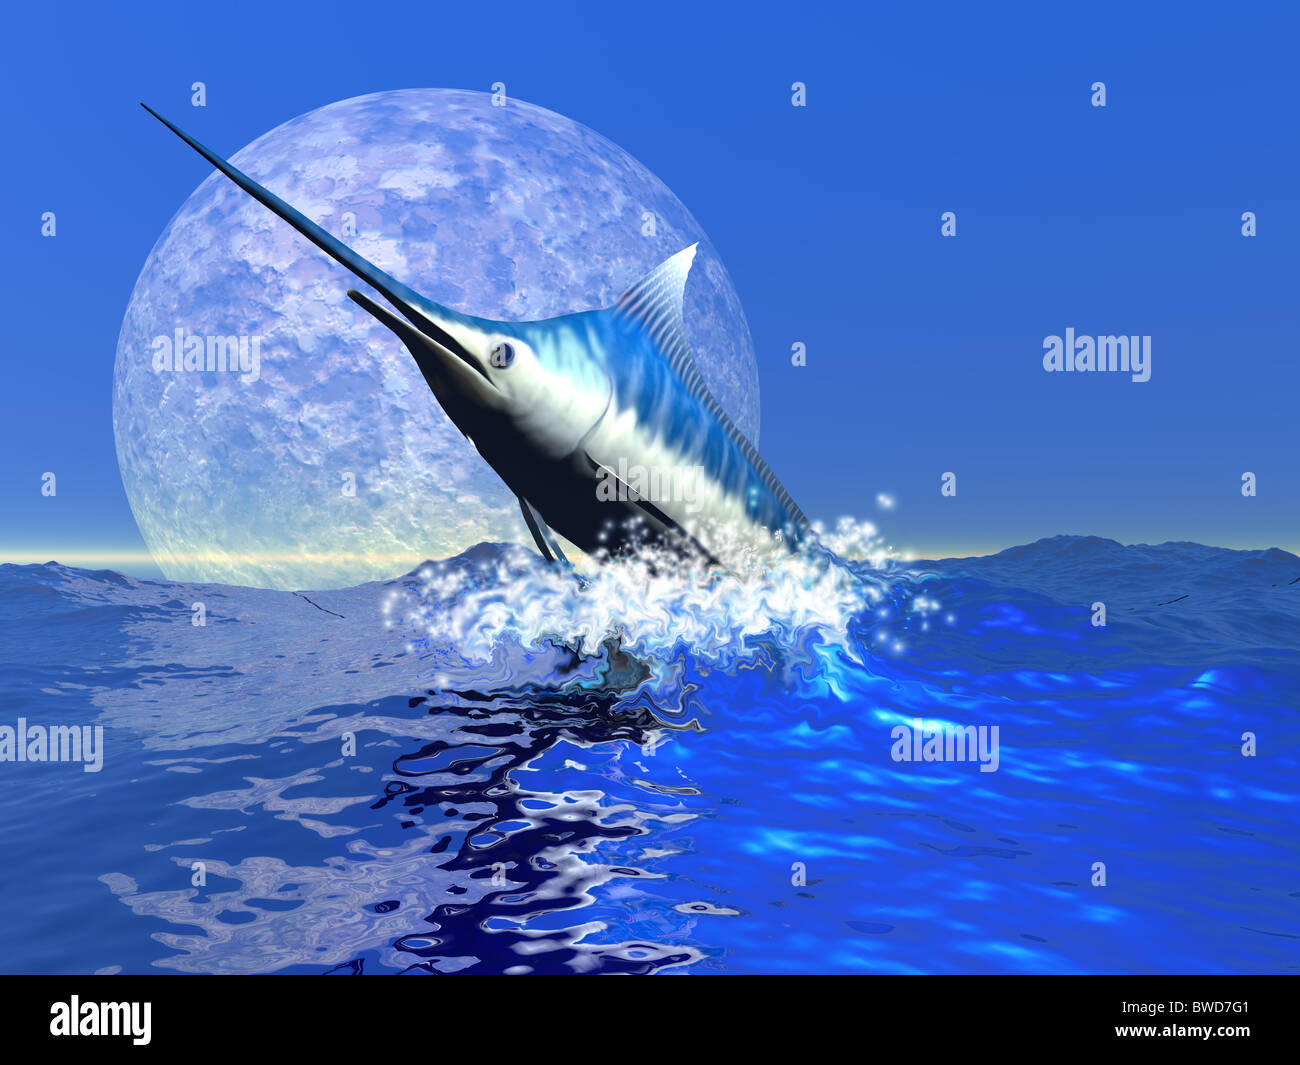 Billfish - A Blue Marlin bursts from the ocean in a great splash of water. Stock Photo